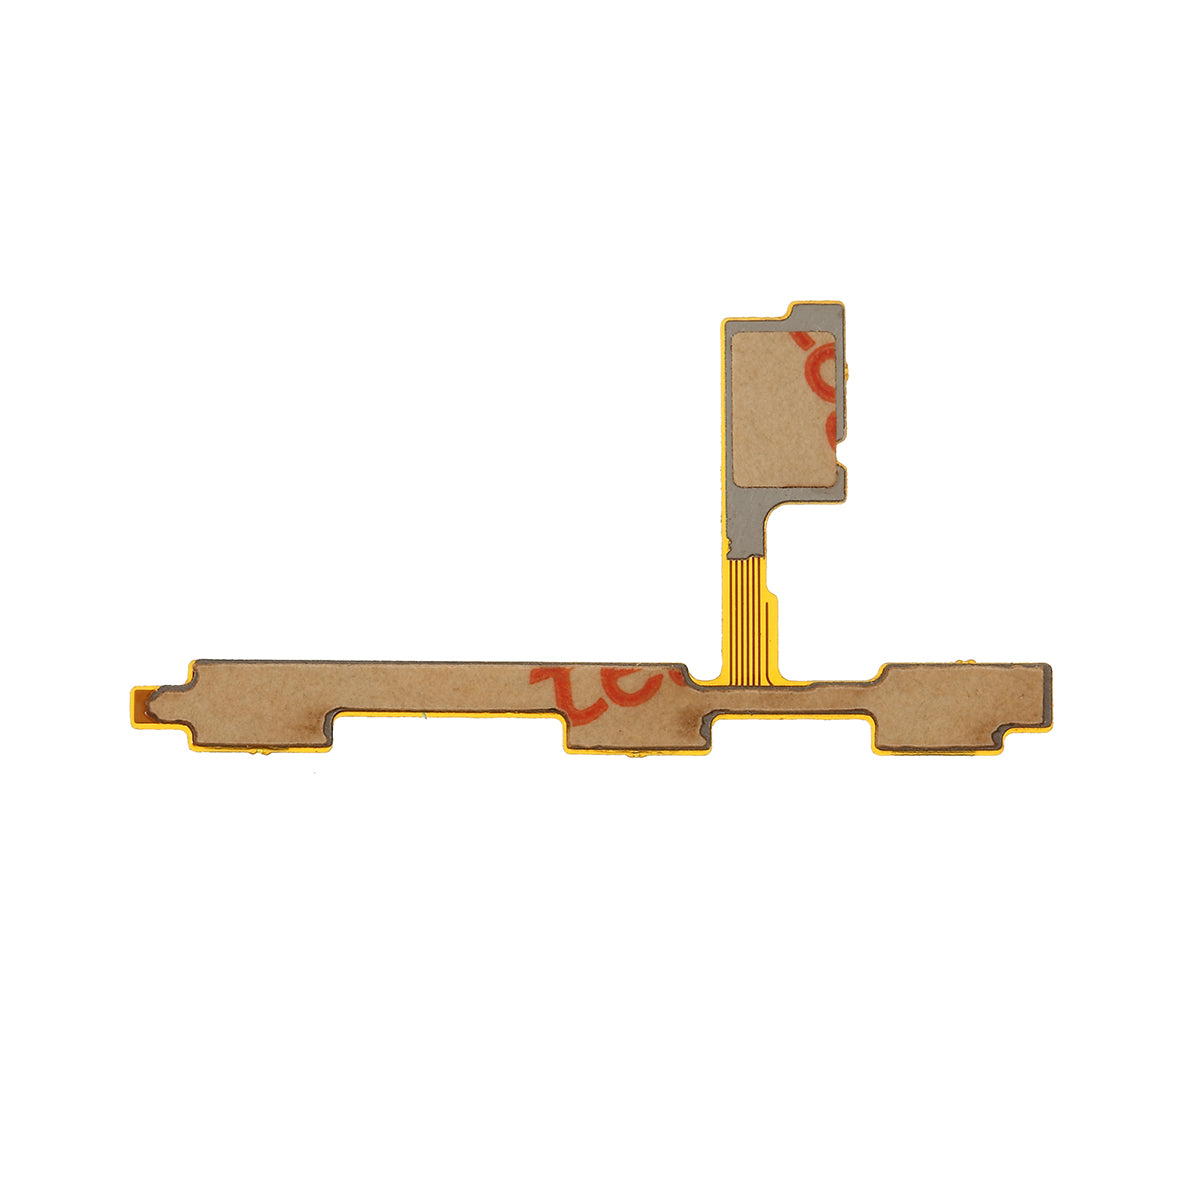 OEM Power On/Off and Volume Buttons Flex Cable for Huawei P30 Lite